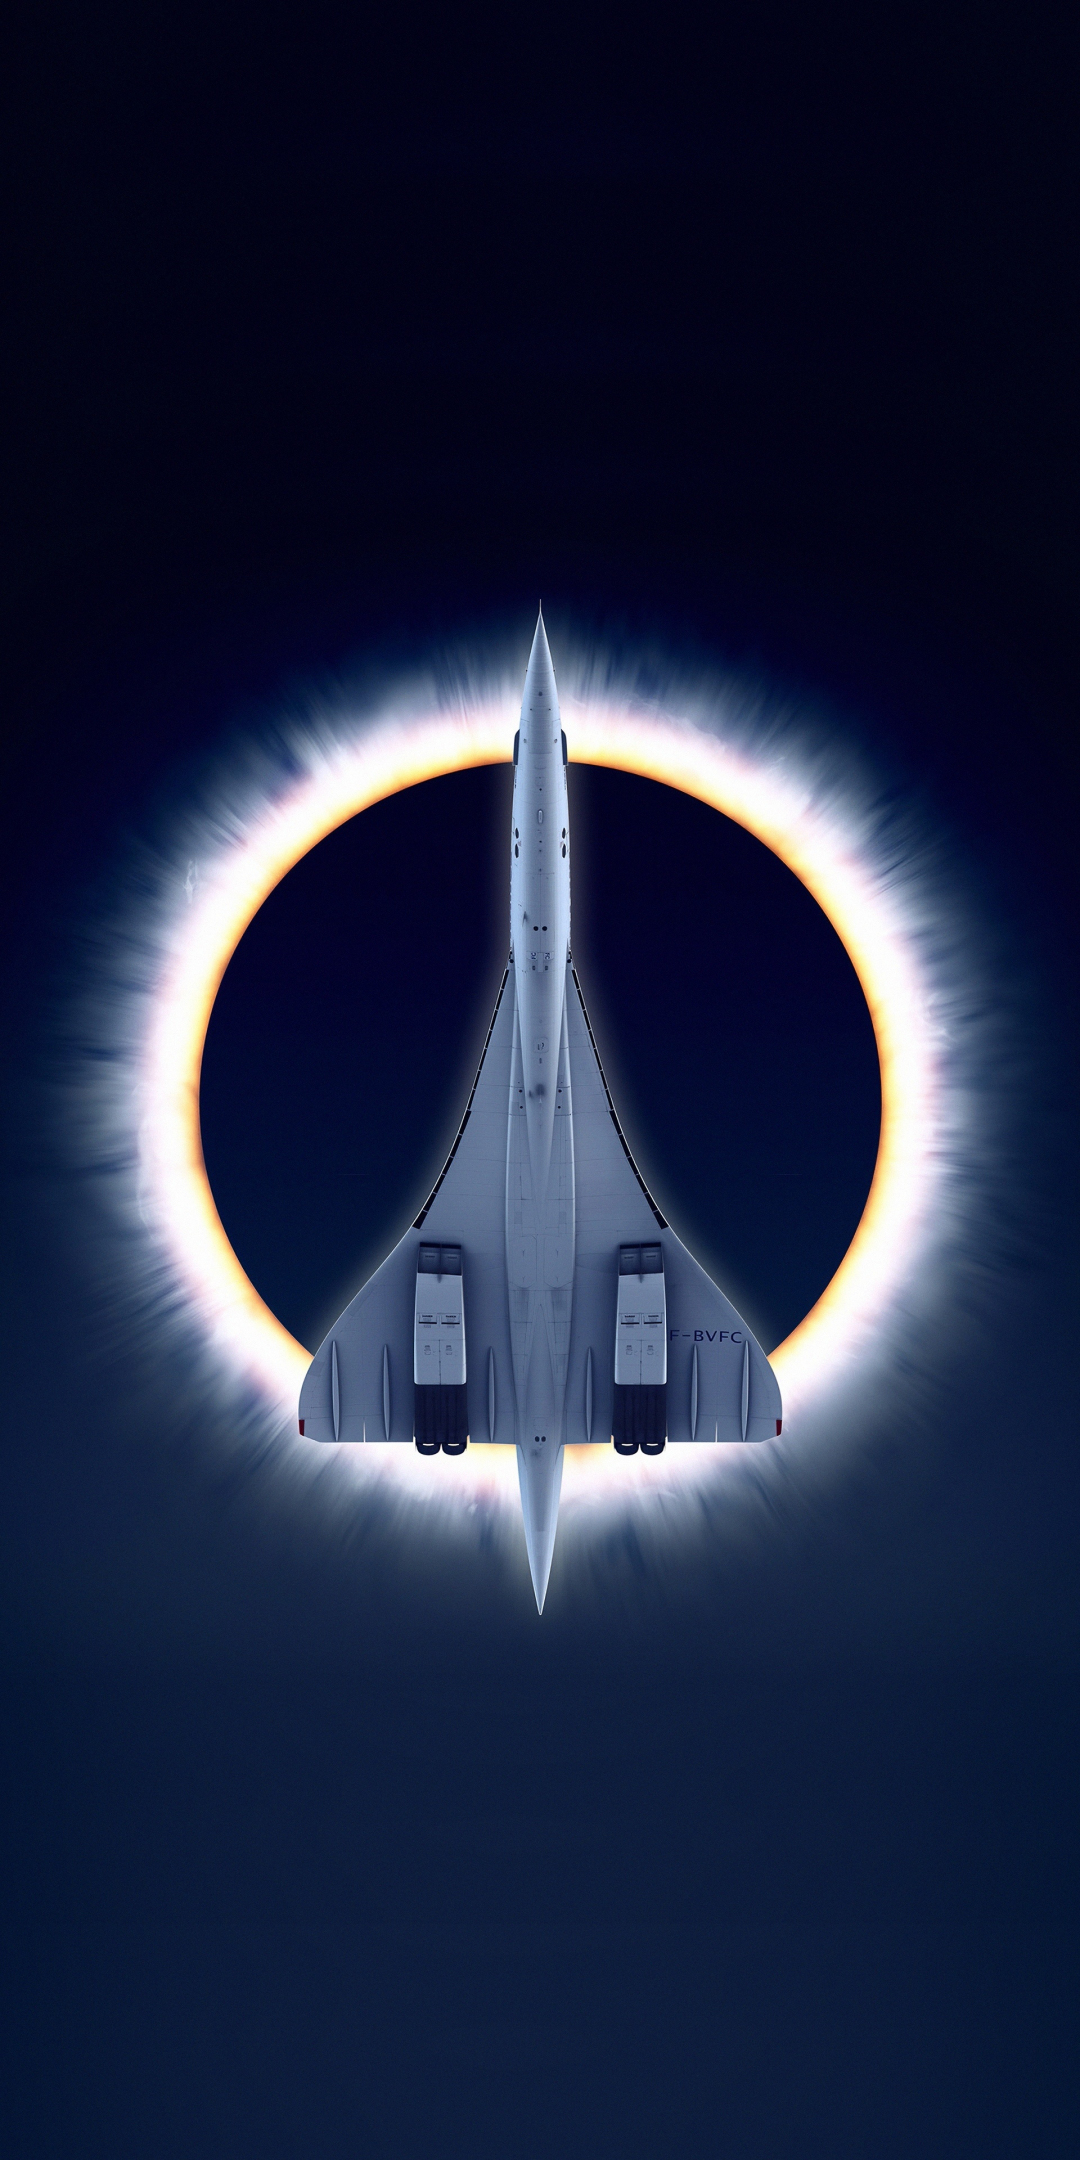 Concorde Carre, eclipse, airplane, moon, aircraft, 1080x2160 wallpaper